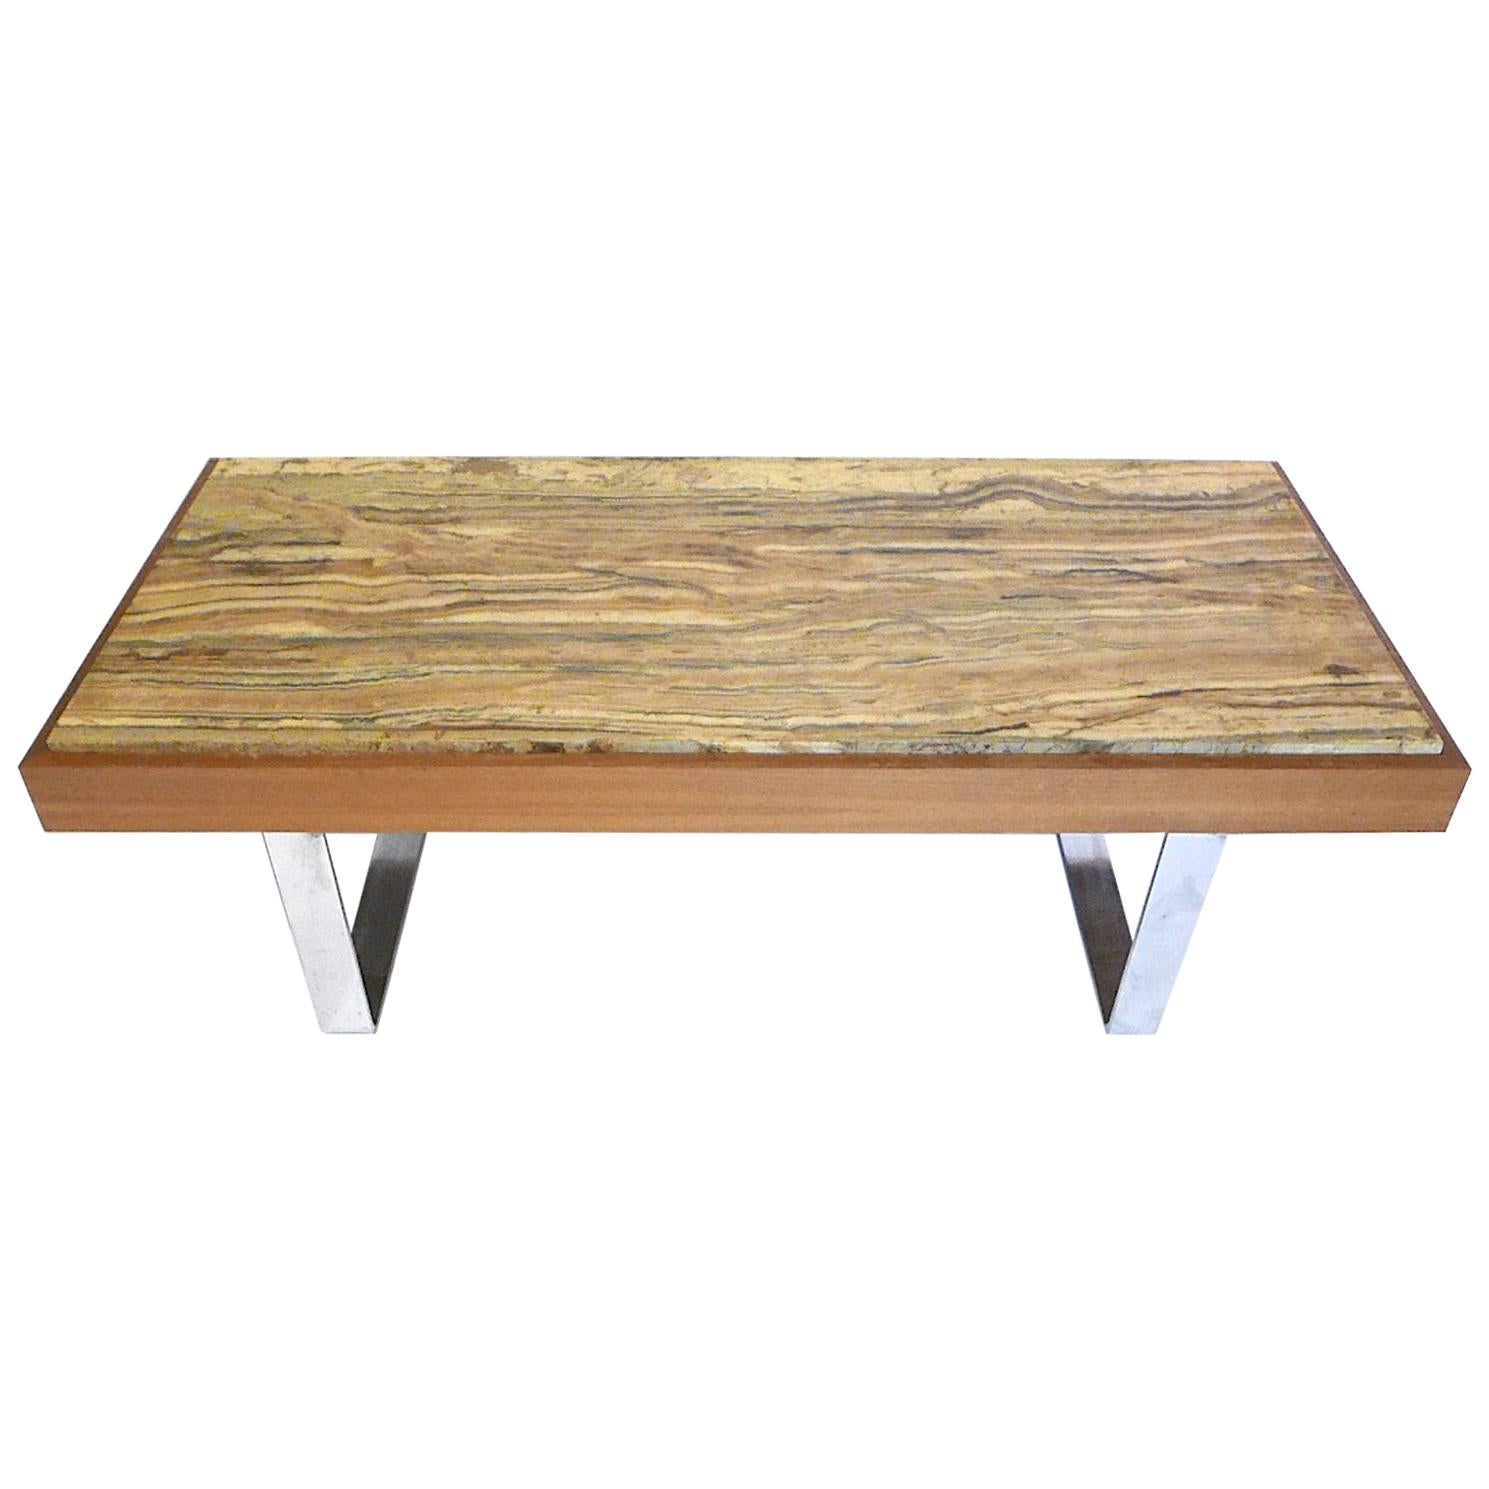 Ilse Möbel Coffee Table with Rare 'Onyx Travertine', Teak & Chrome from Germany